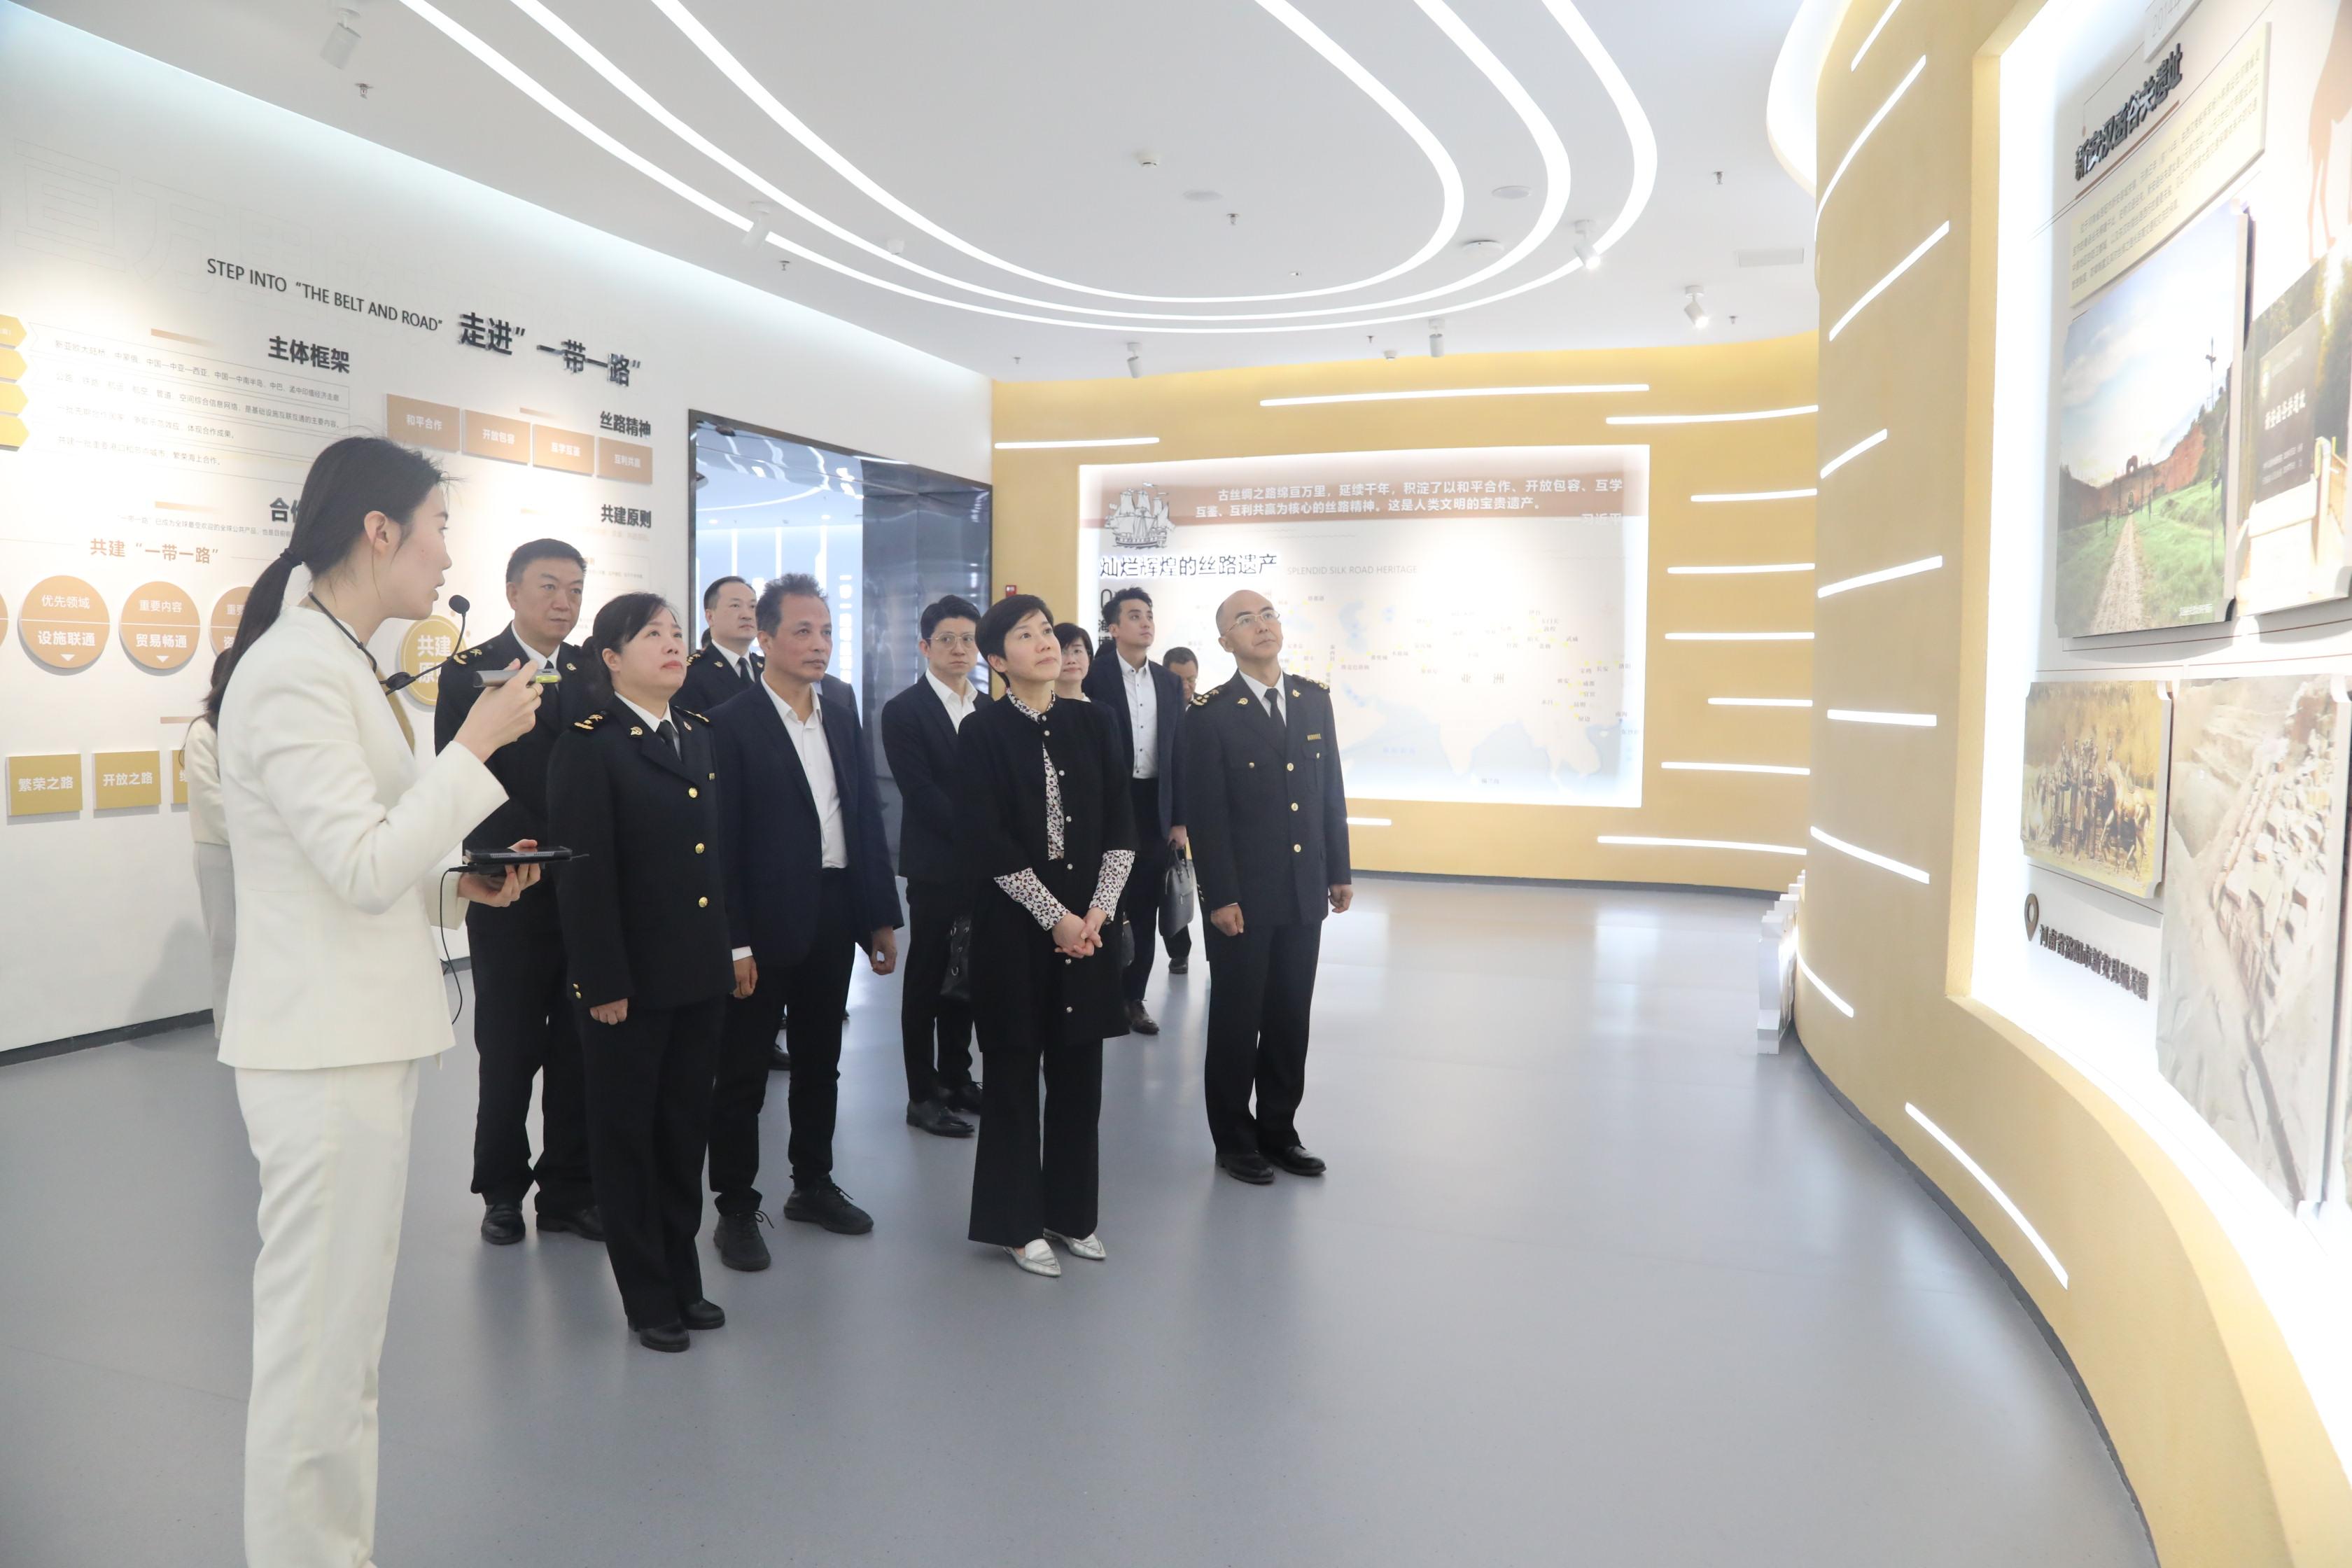 The Commissioner of Customs and Excise, Ms Louise Ho (front row, second right), today (April 9) led a delegation to visit Zhengzhou, Henan Province. Photo shows Ms Ho, accompanied by the Director General in Zhengzhou Customs District, Mr Wang Jun (front row, first right), and  the Deputy Director General of the Guangdong Sub-Administration of the General Administration of Customs of the People's Republic of China, Mr Feng Guoqing (front row, second left), visiting Zhengzhou Xinzheng International Airport today to study the latest development of international air cargo logistics.